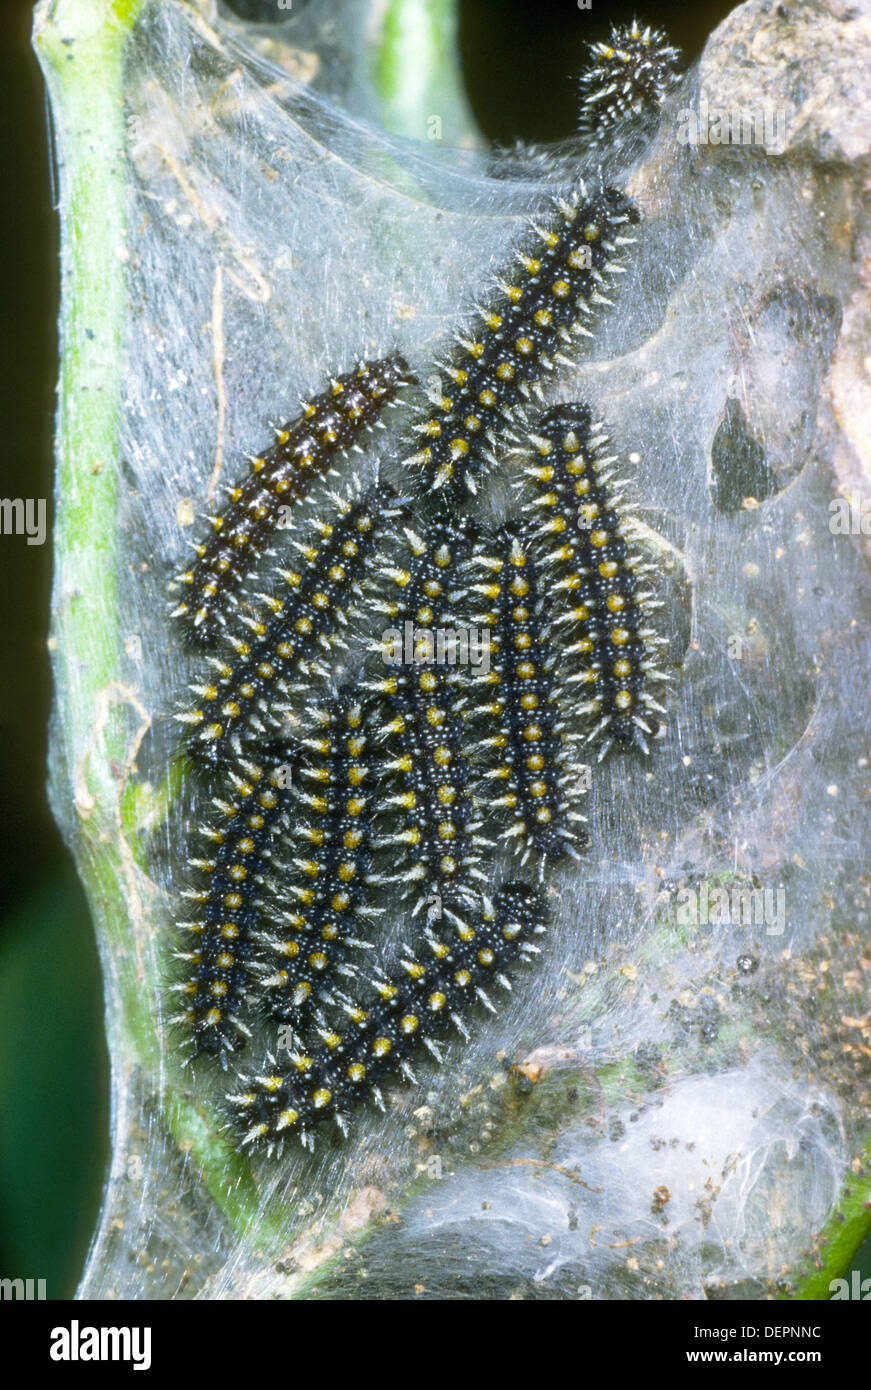 Brush-footed butterfly (Nymphalis polychloros), larvae Stock Photo